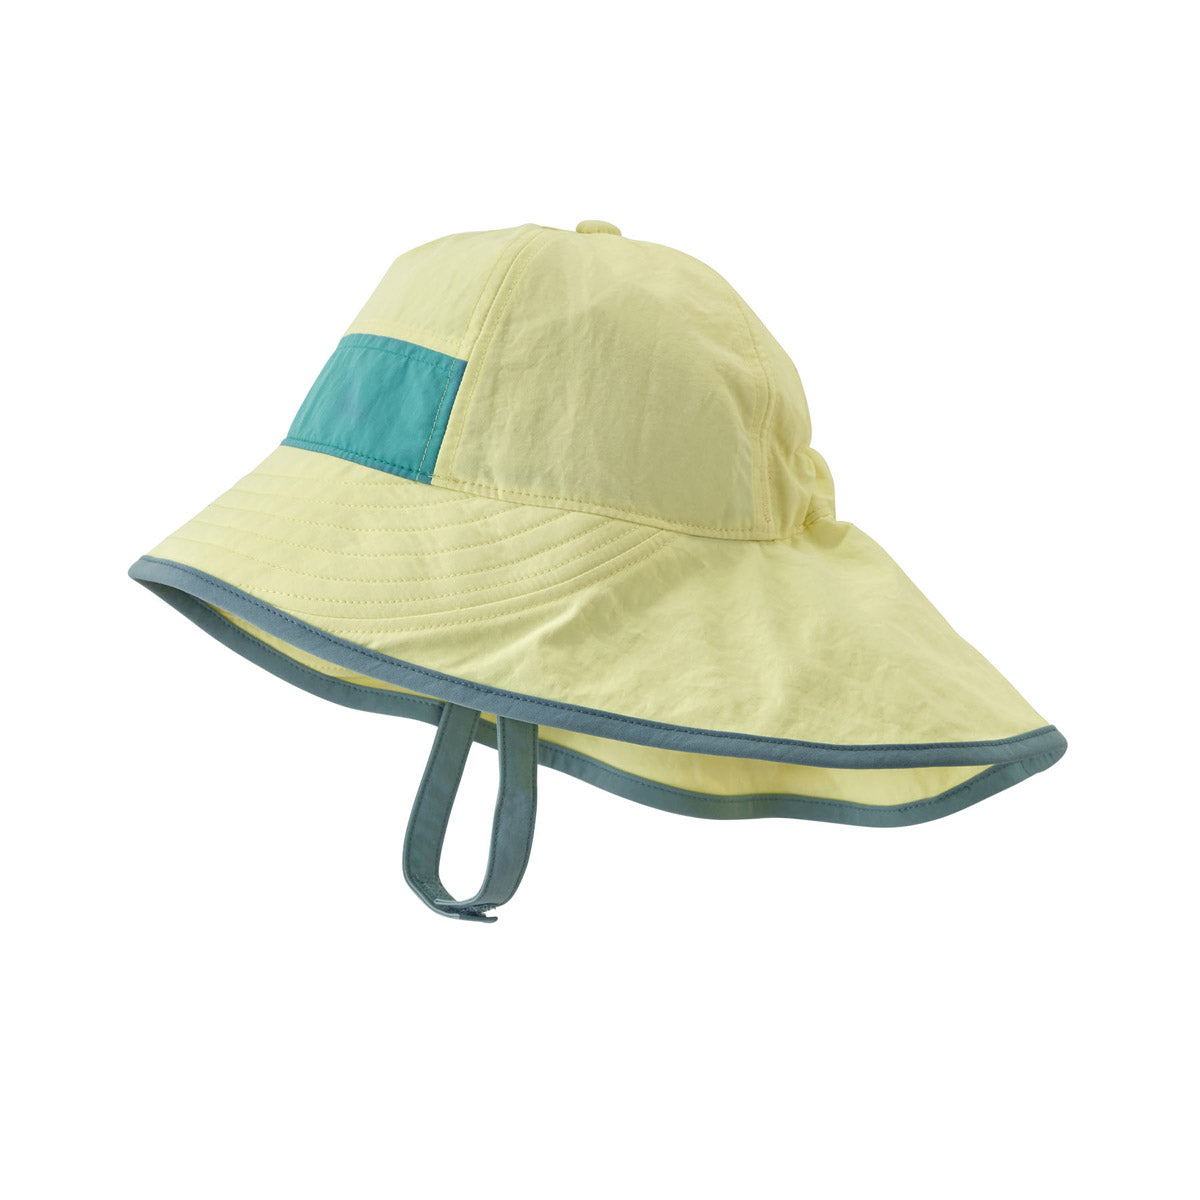 Patagonia Baby Block-the-Sun Hat - New Navy - 12M